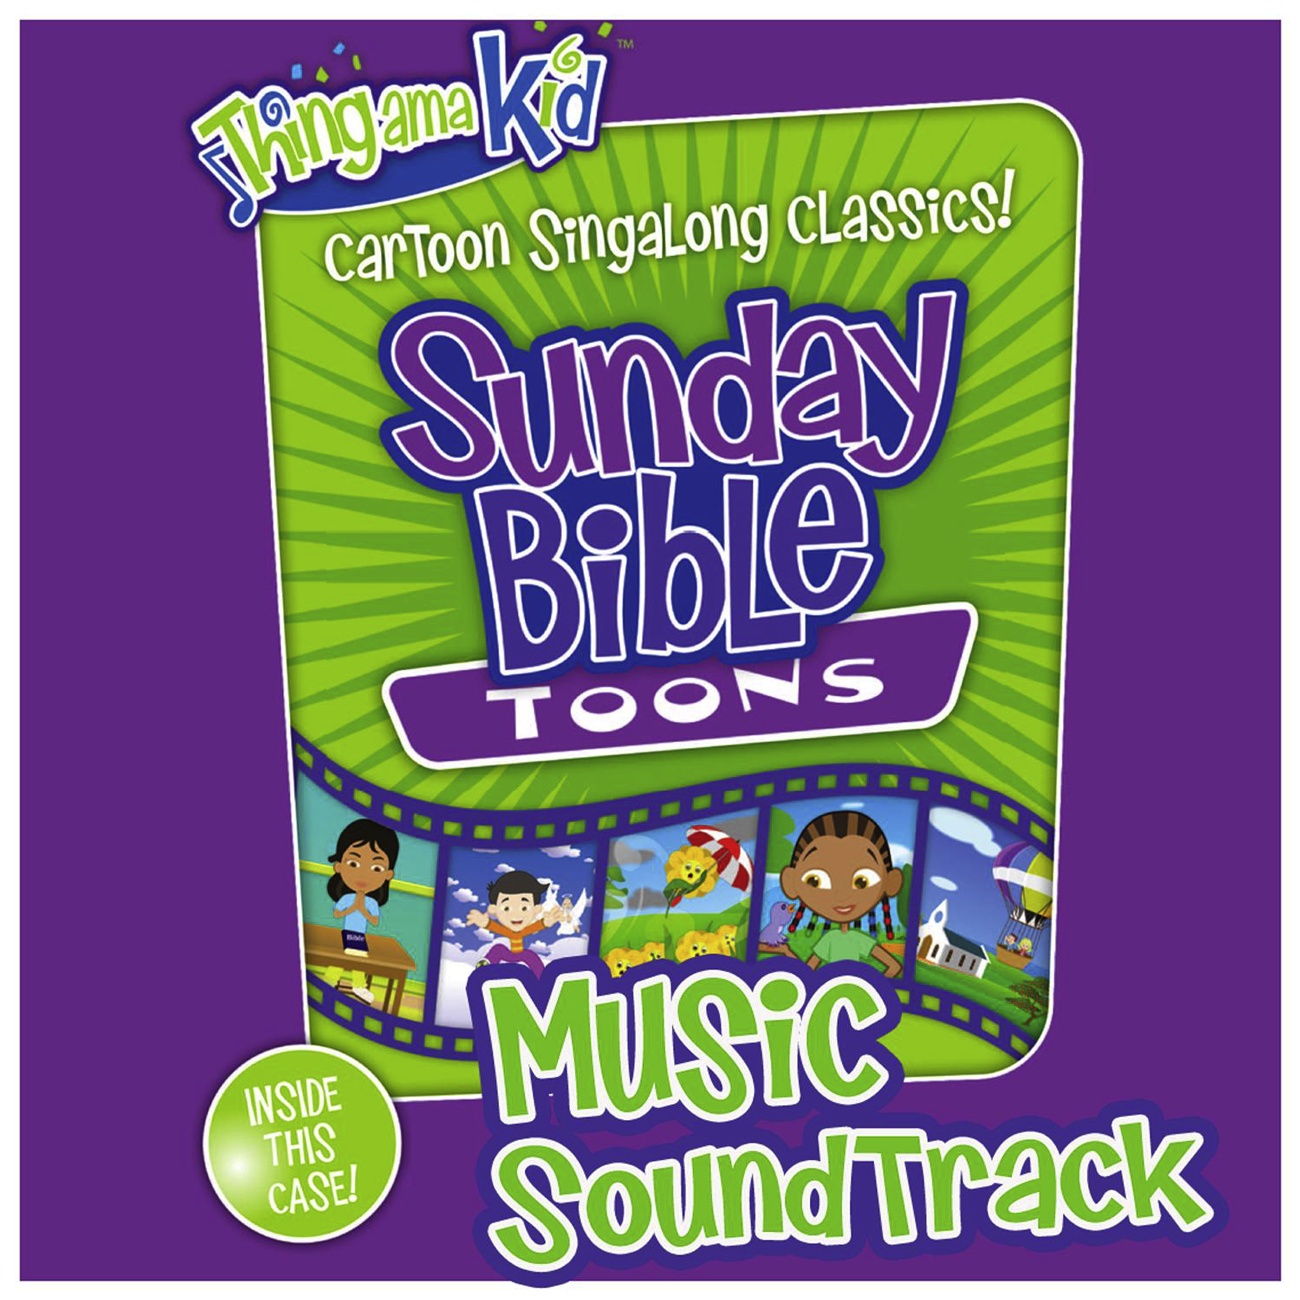 Books Of The New Testament (Sunday Bible Toons Music Album Version)